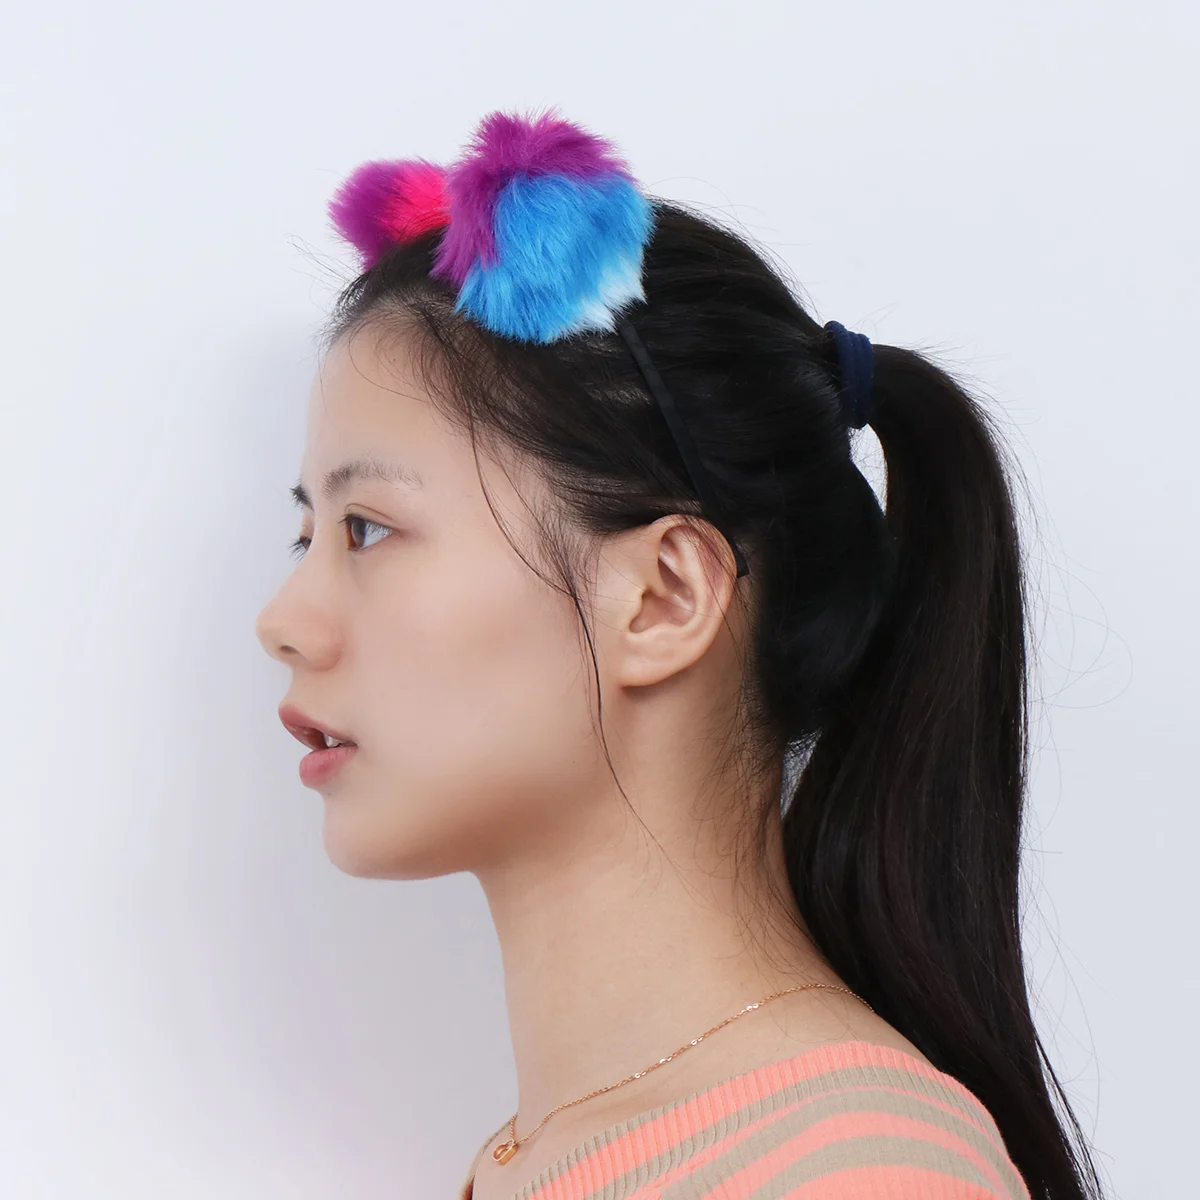 

4 Pcs Fashionable Hair Accessory Accessories Women Fluffy Fuzzy Ball Headband Clasp Colorful Hoop Miss Jewels